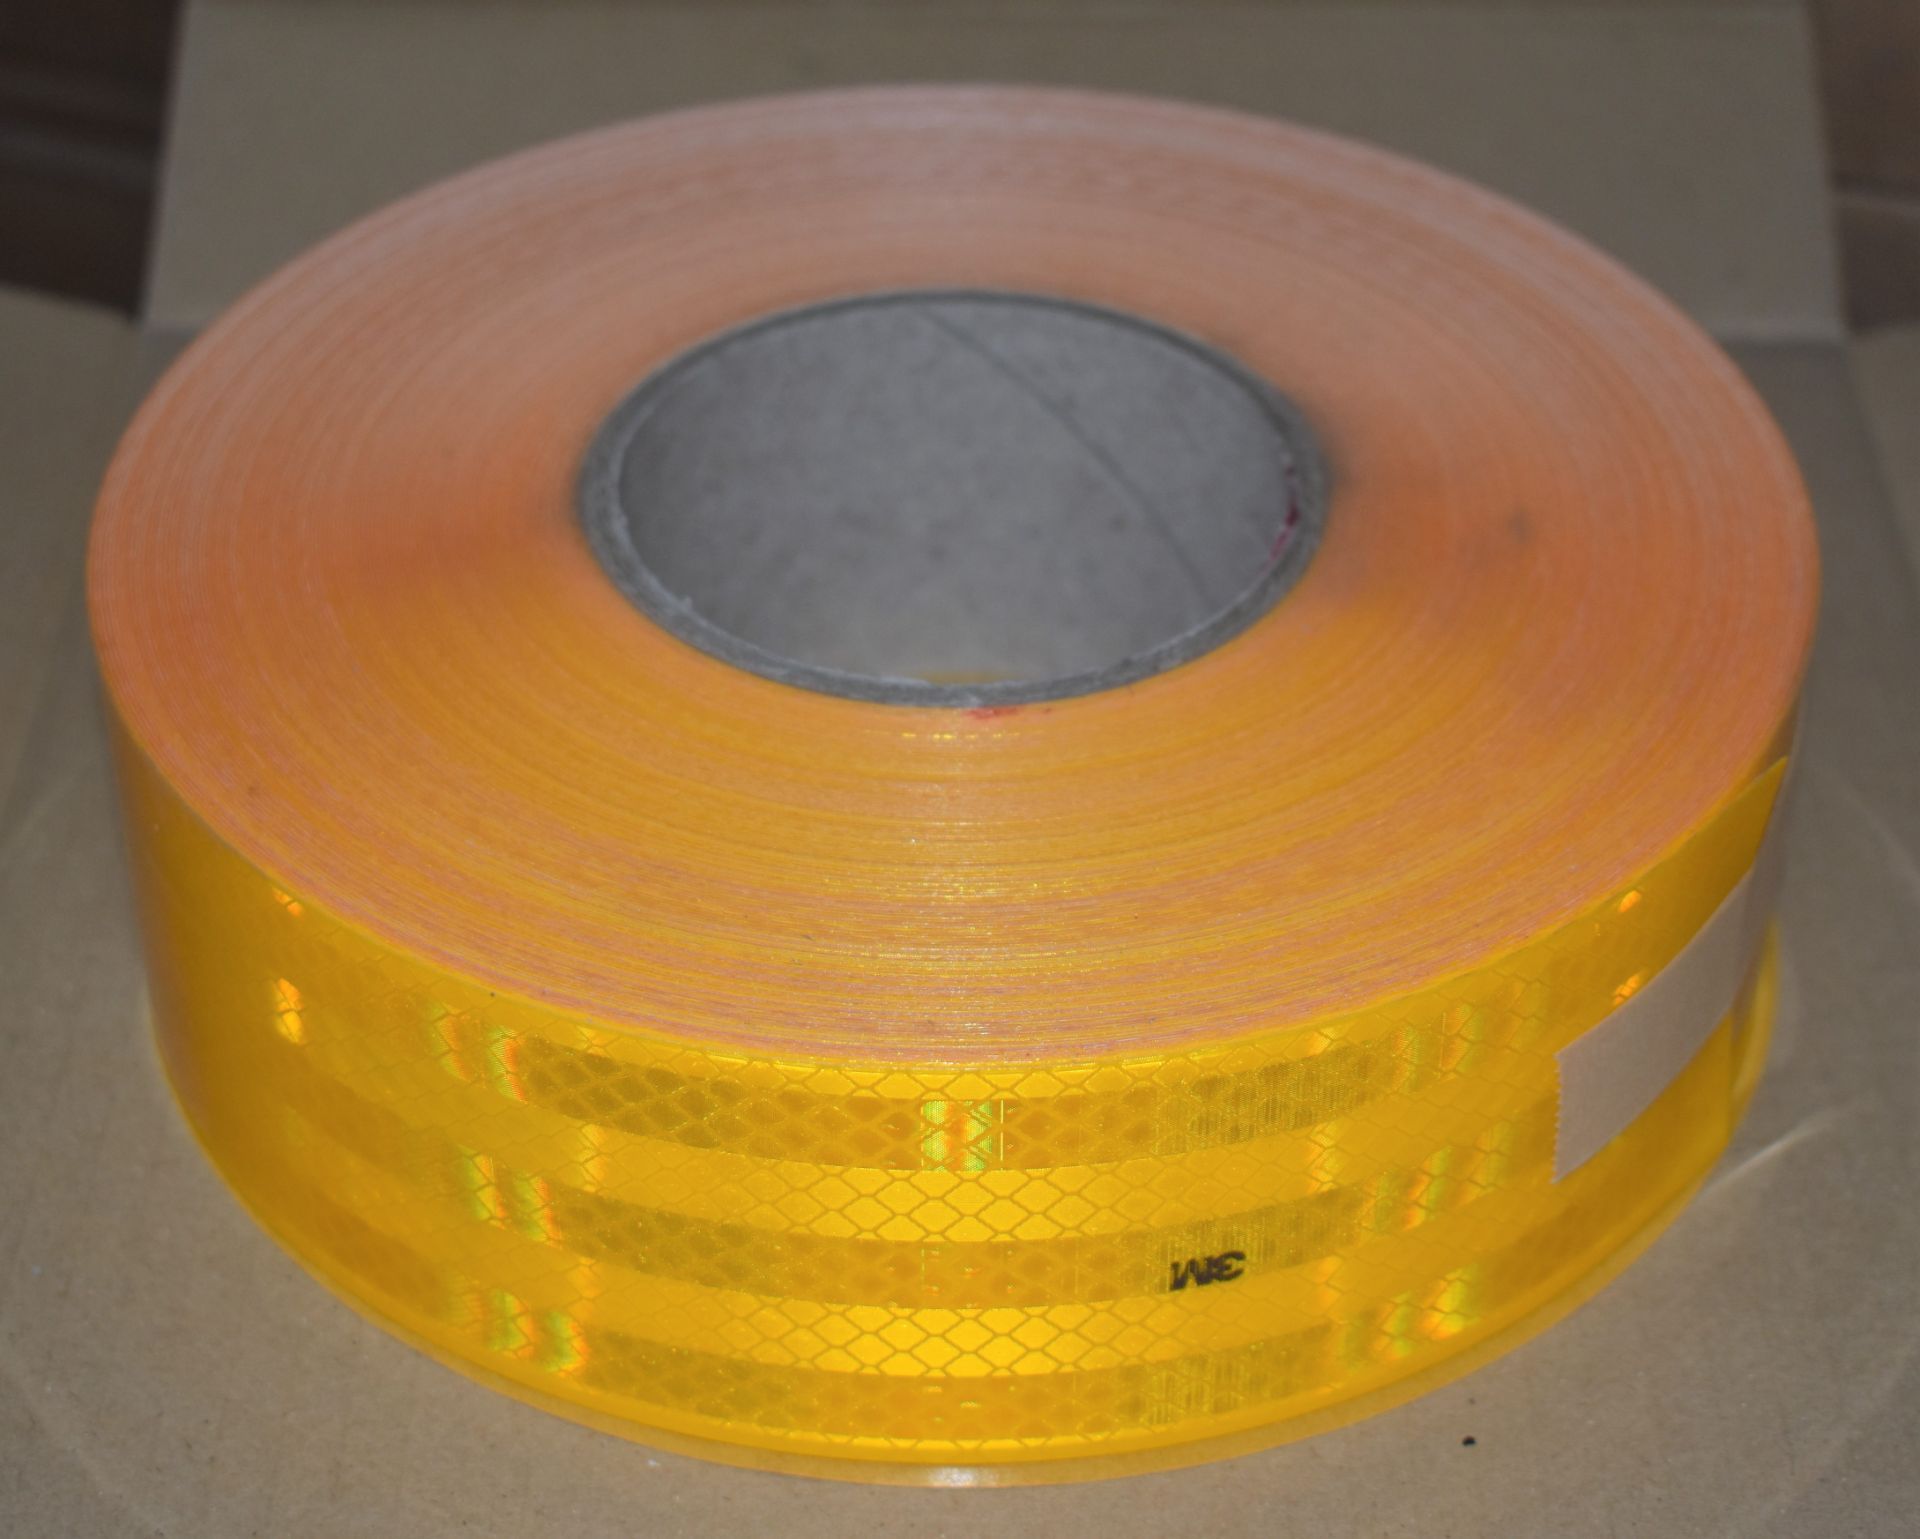 1 x Roll of 3M Conspicuity Tape Reflective Sheeting - Size 55mm x 50m - Diamond Grade - Colour - Image 3 of 5